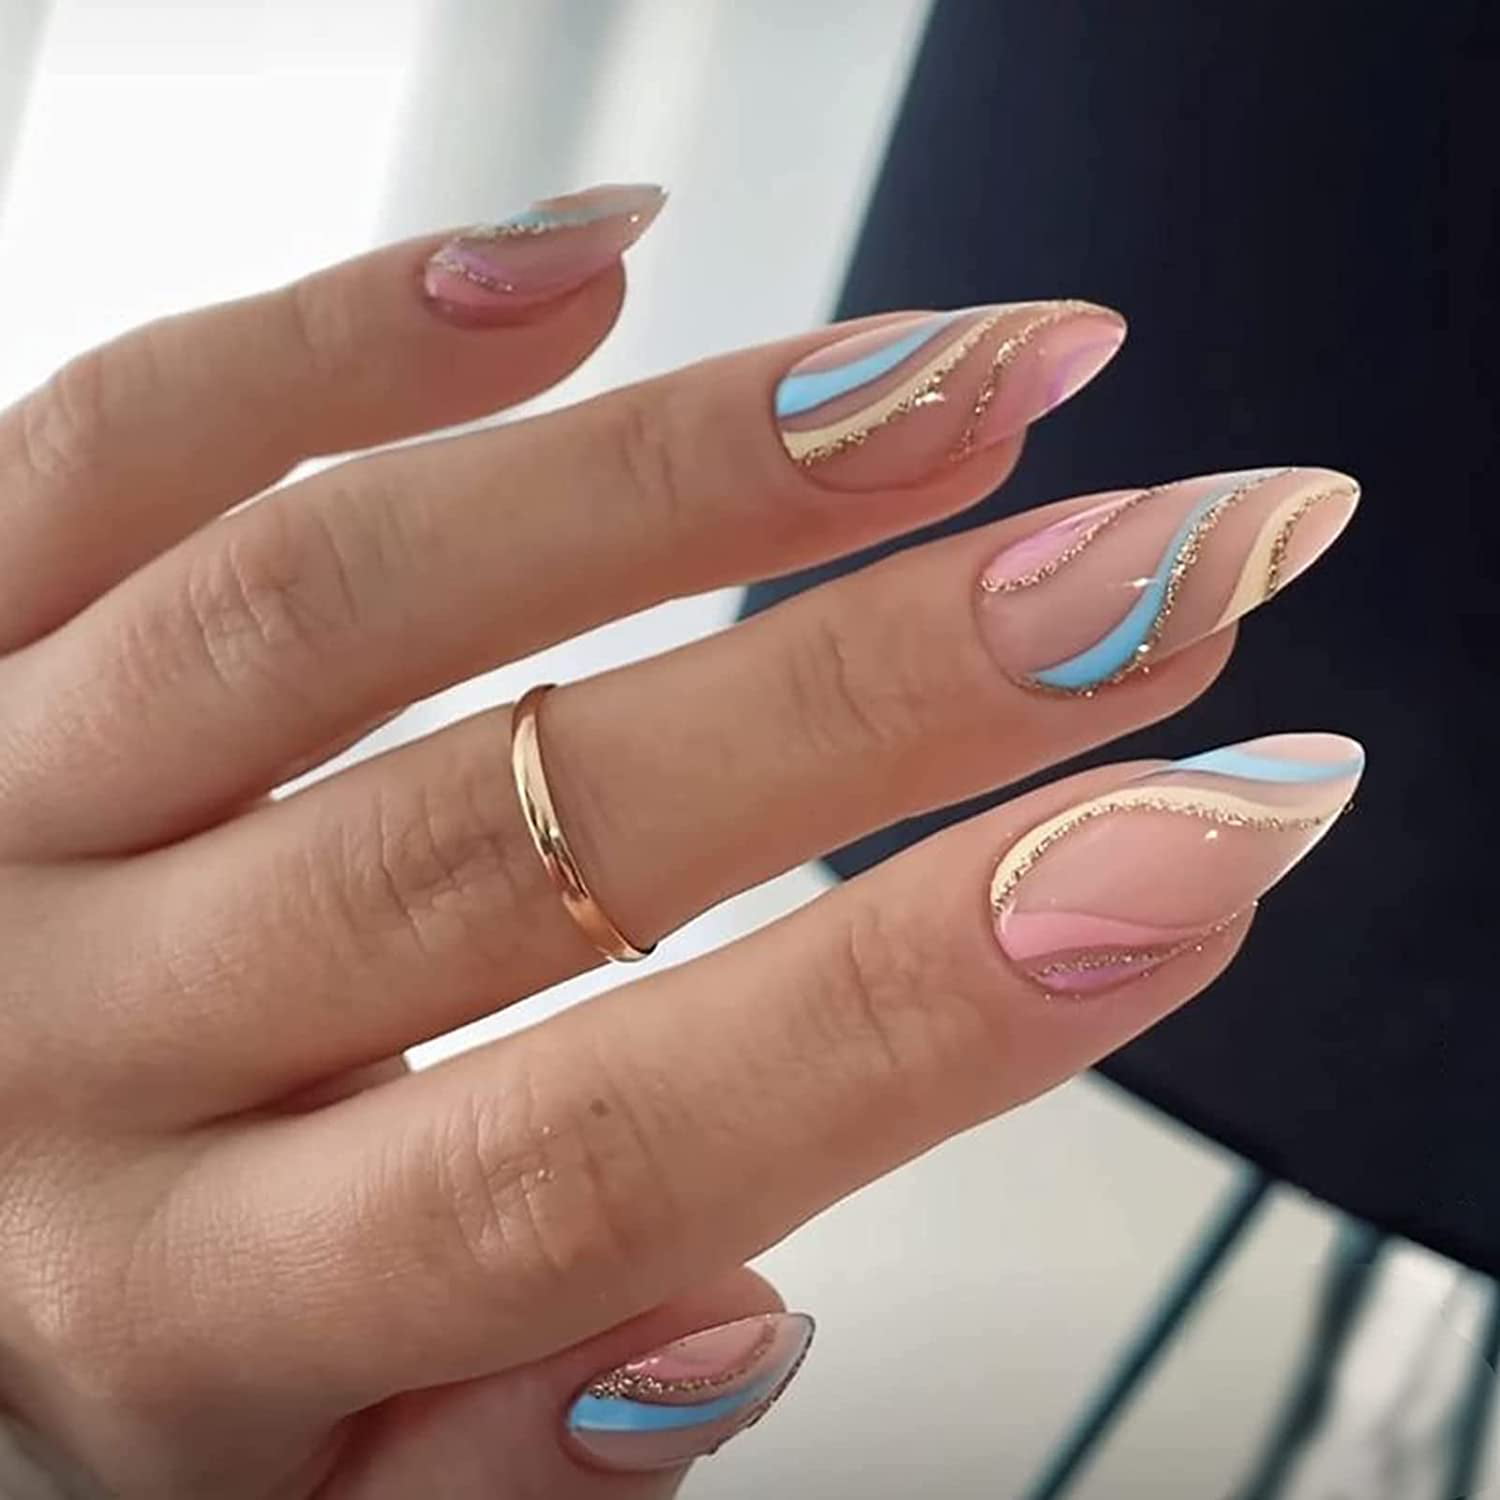 39 Ways to wear glitter nails for an Elegant Touch